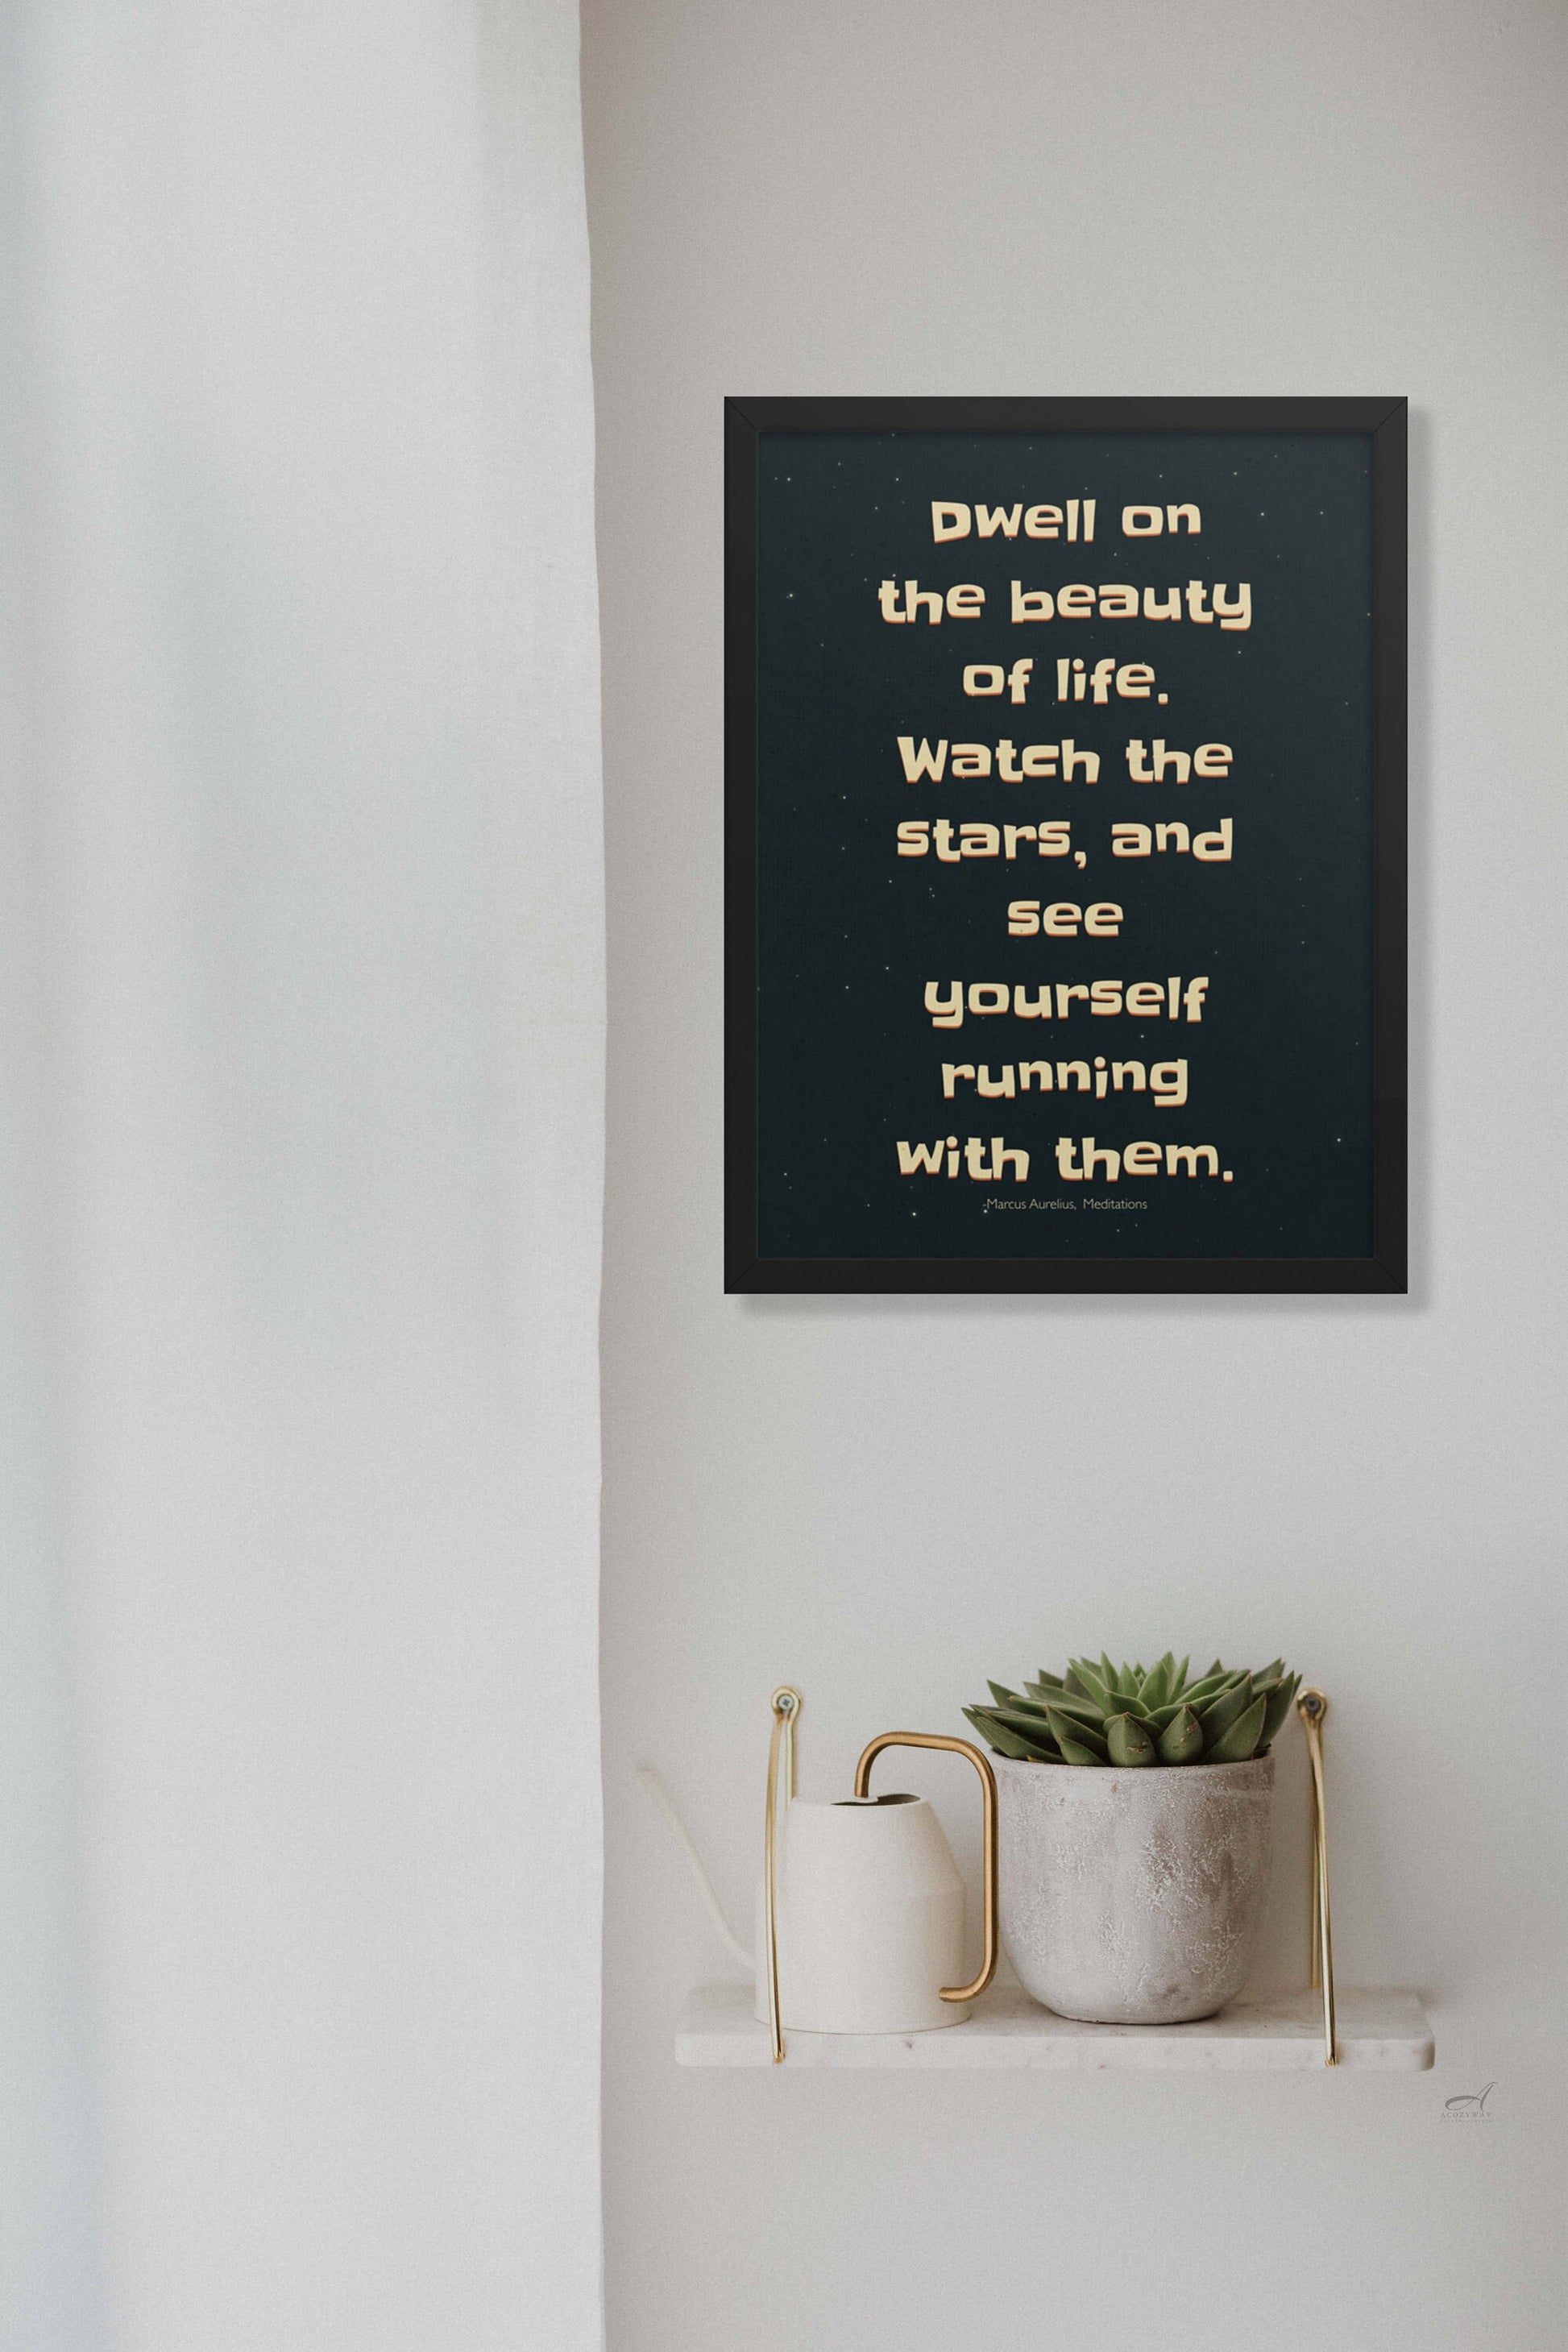 Dwell on the beauty of life marcus aurelius quote in beige color on black background in black framed poster.